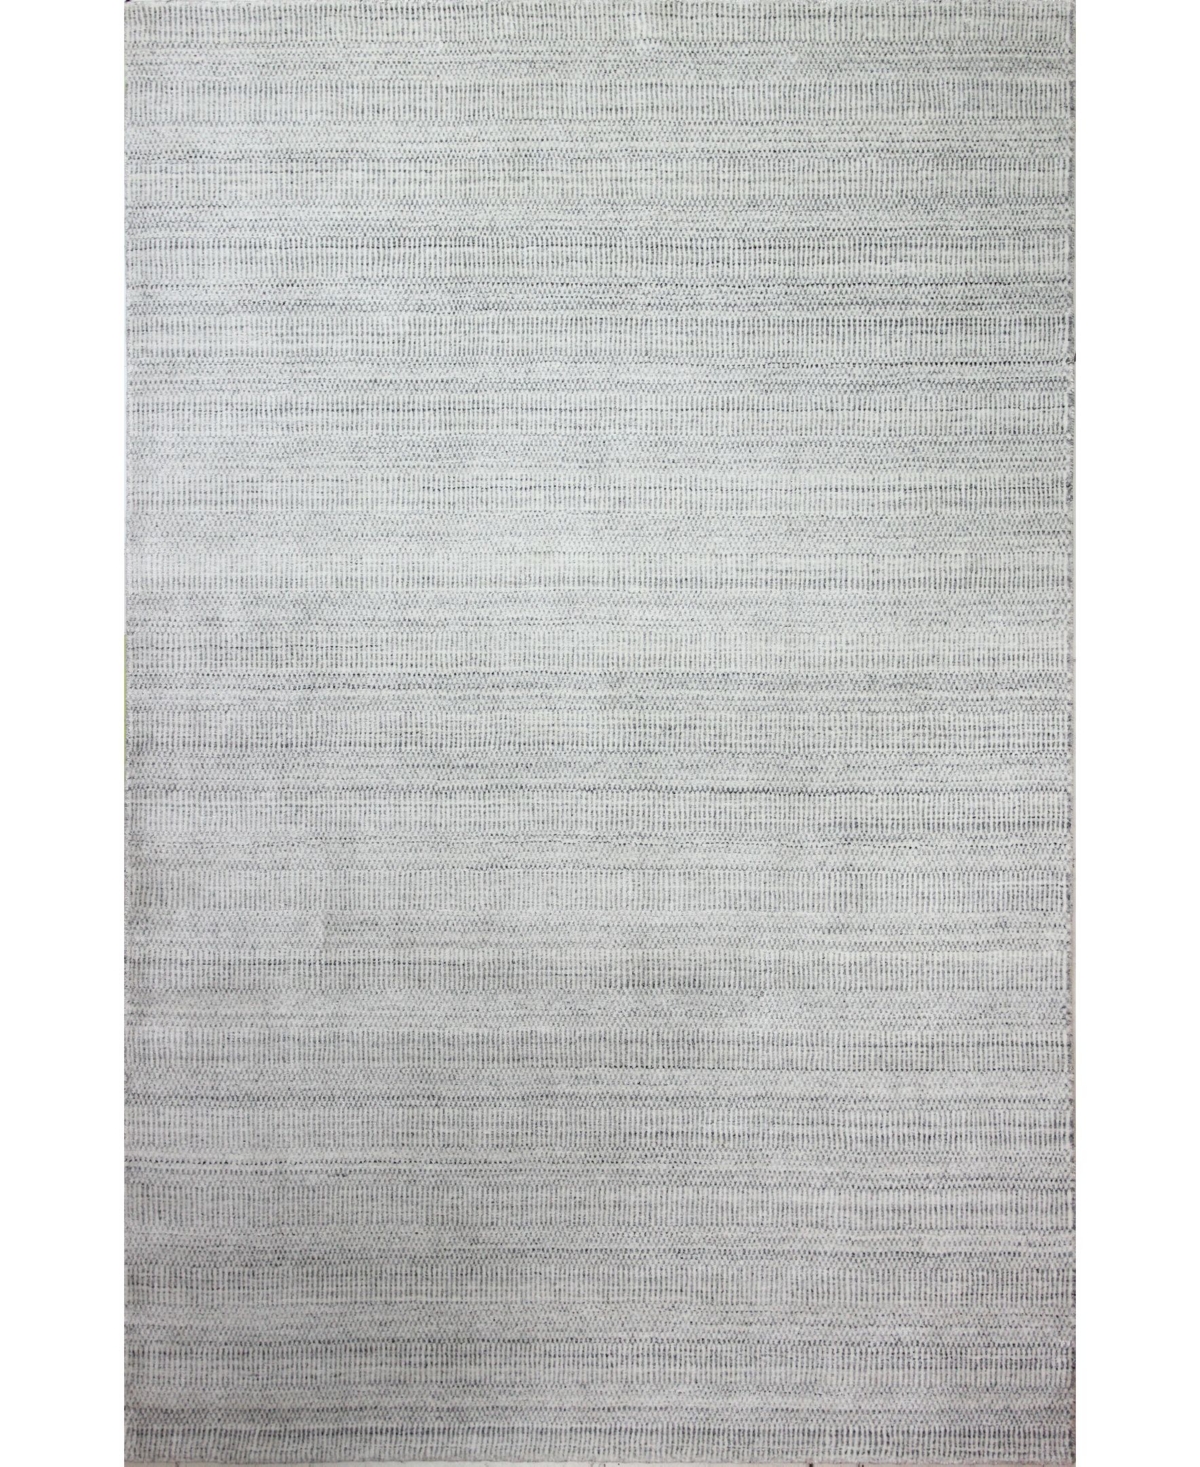 Closeout! Bb Rugs Forge M144 5'6in x 8'6in Area Rug - Glacier